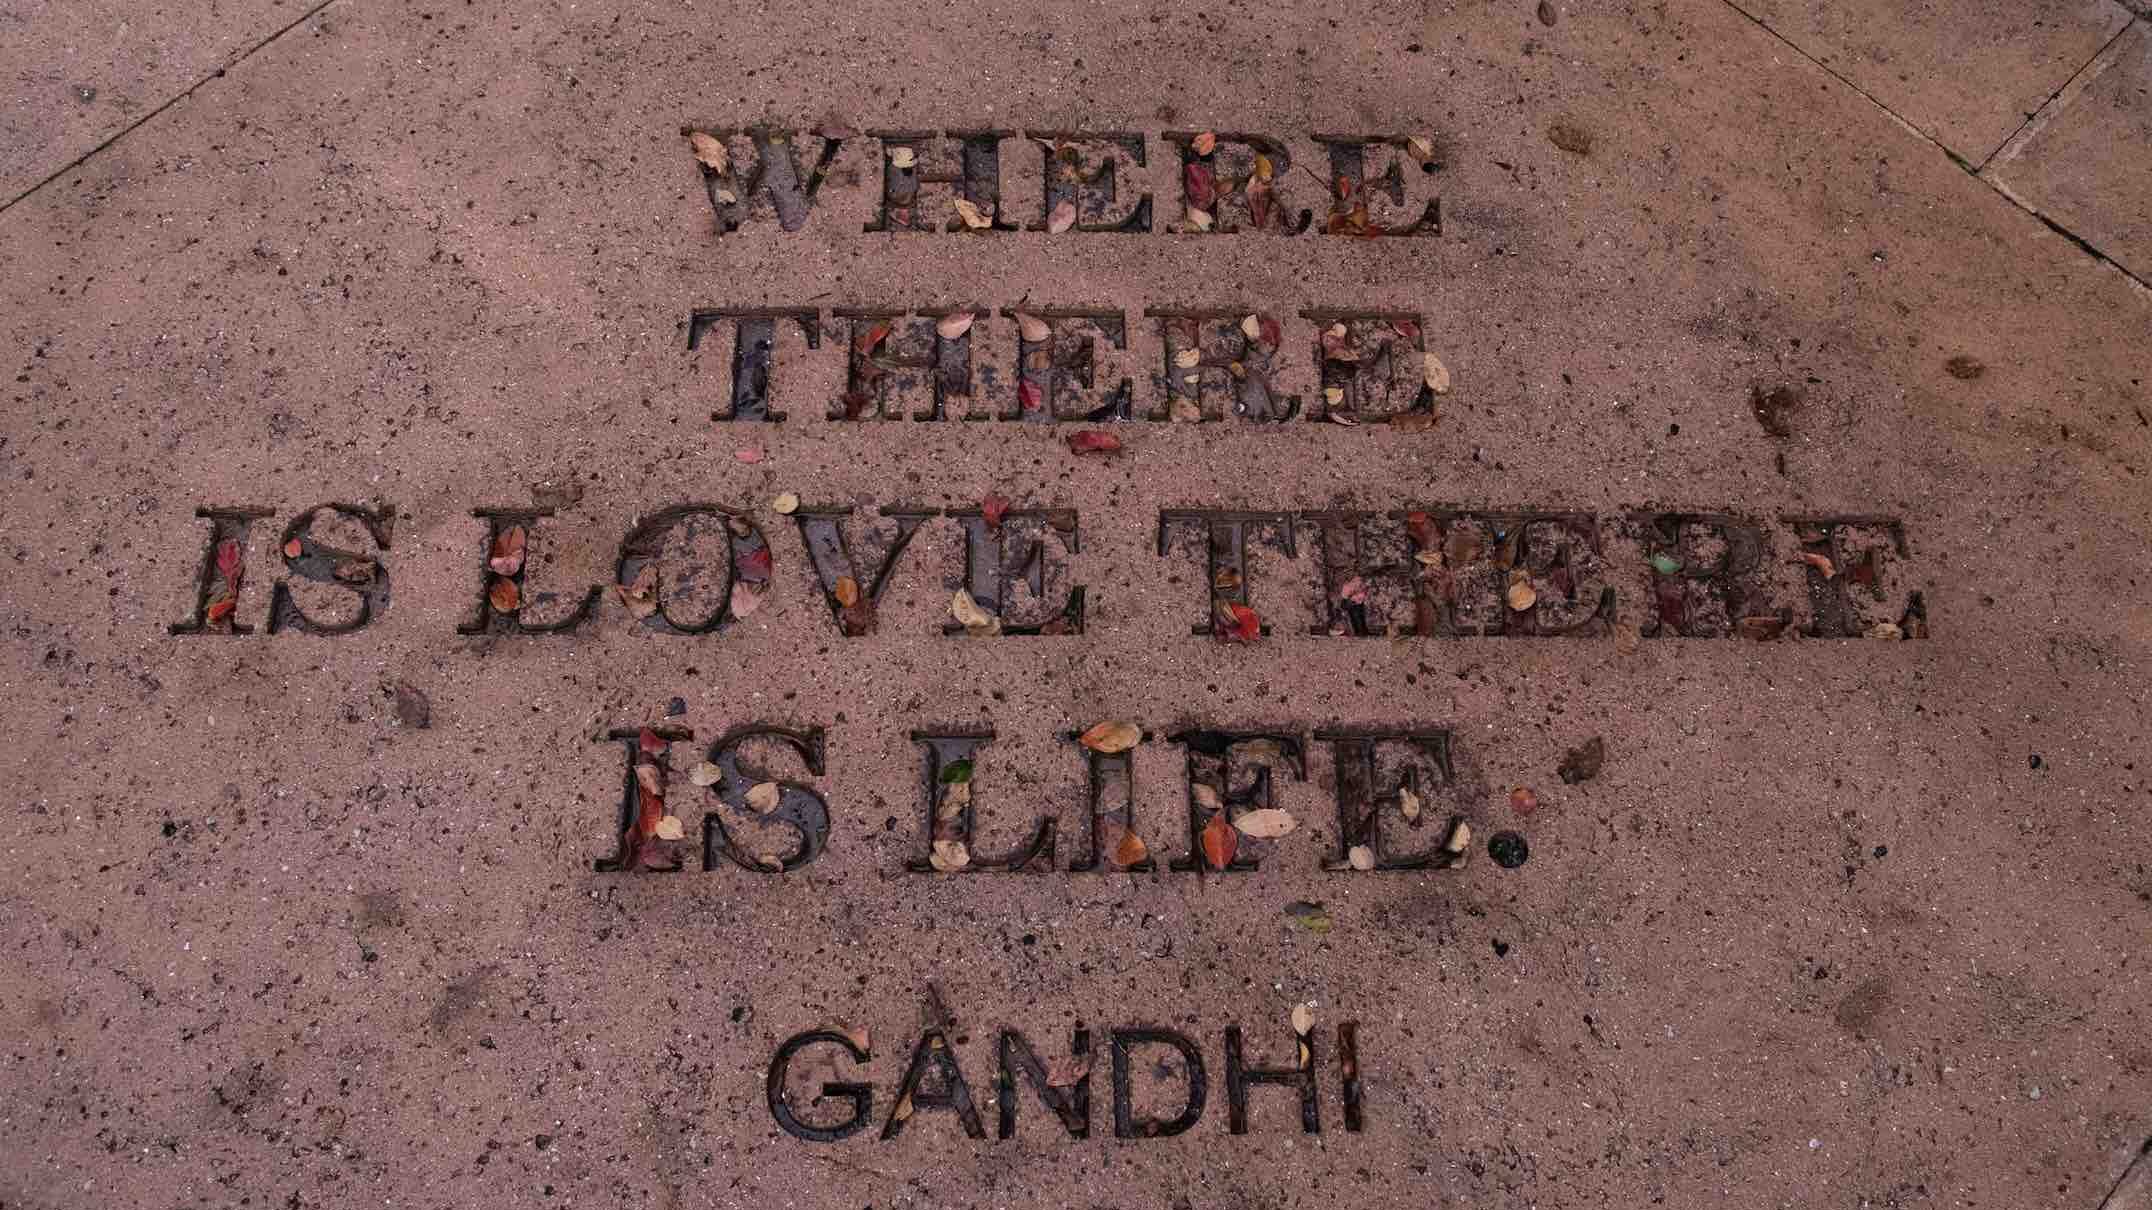 Gandhi quote on a sidewalk "where there is love there is life."